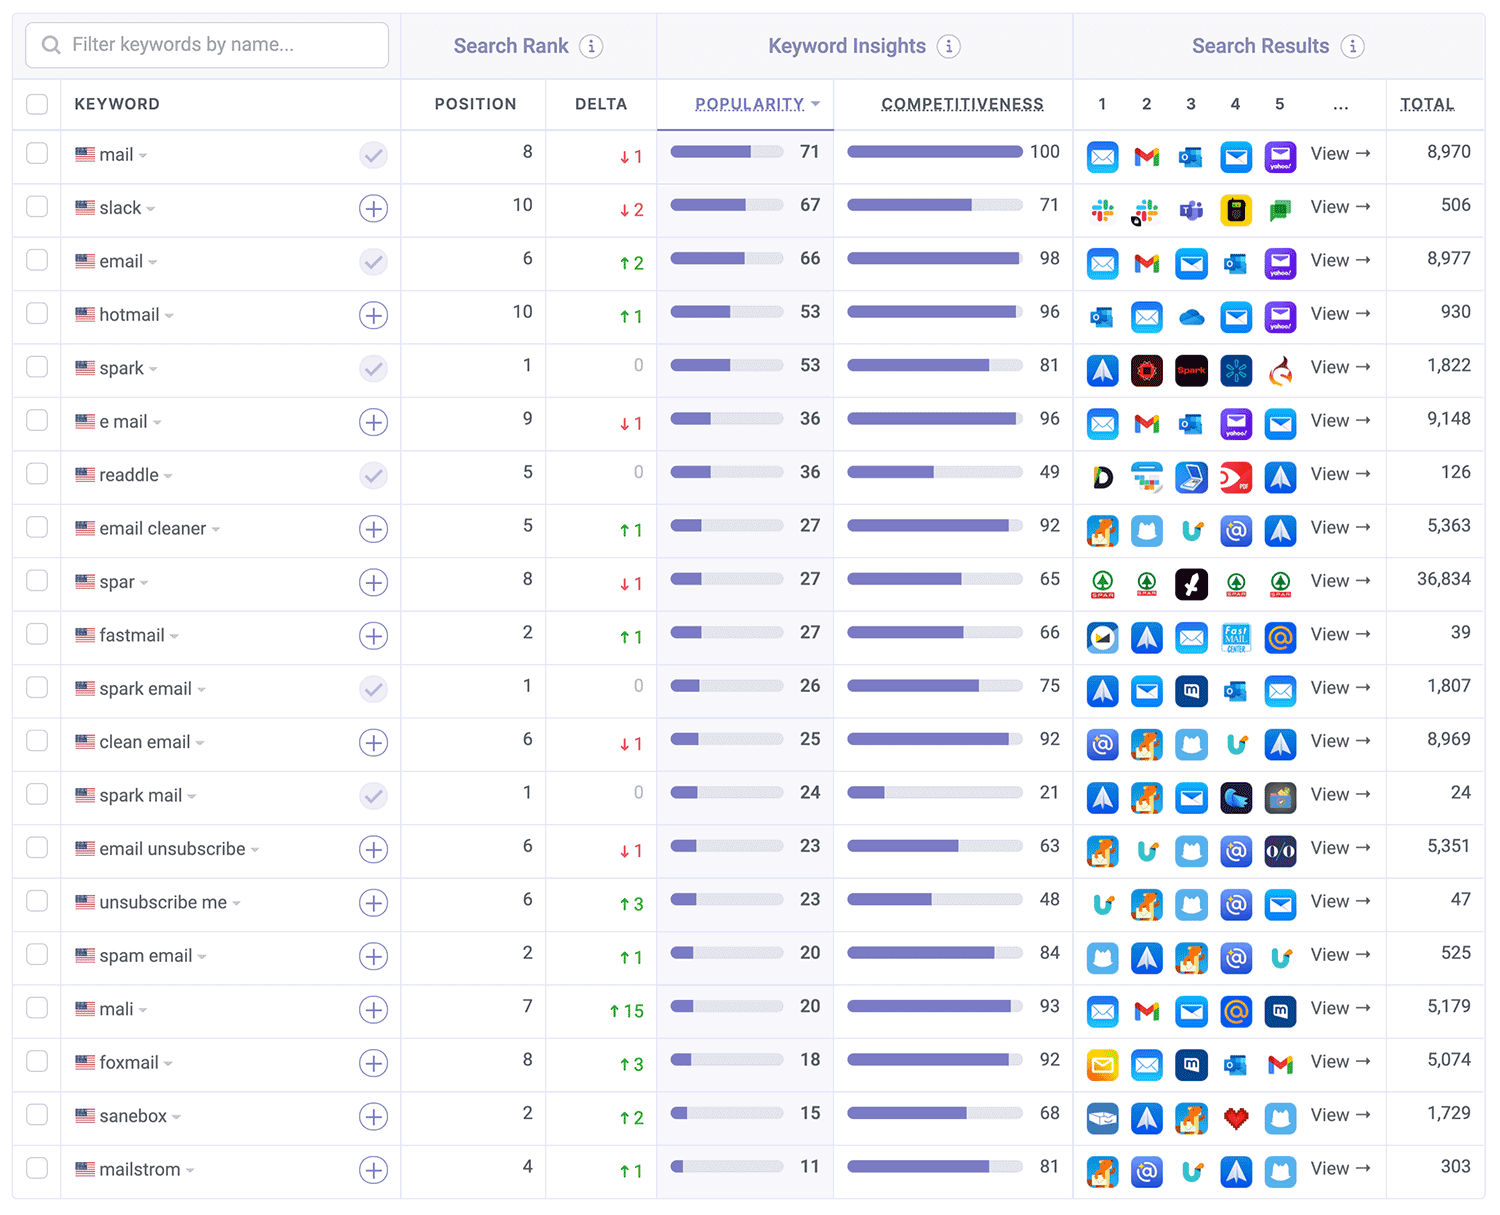 Spark is ranked on the App Store by Appfigures